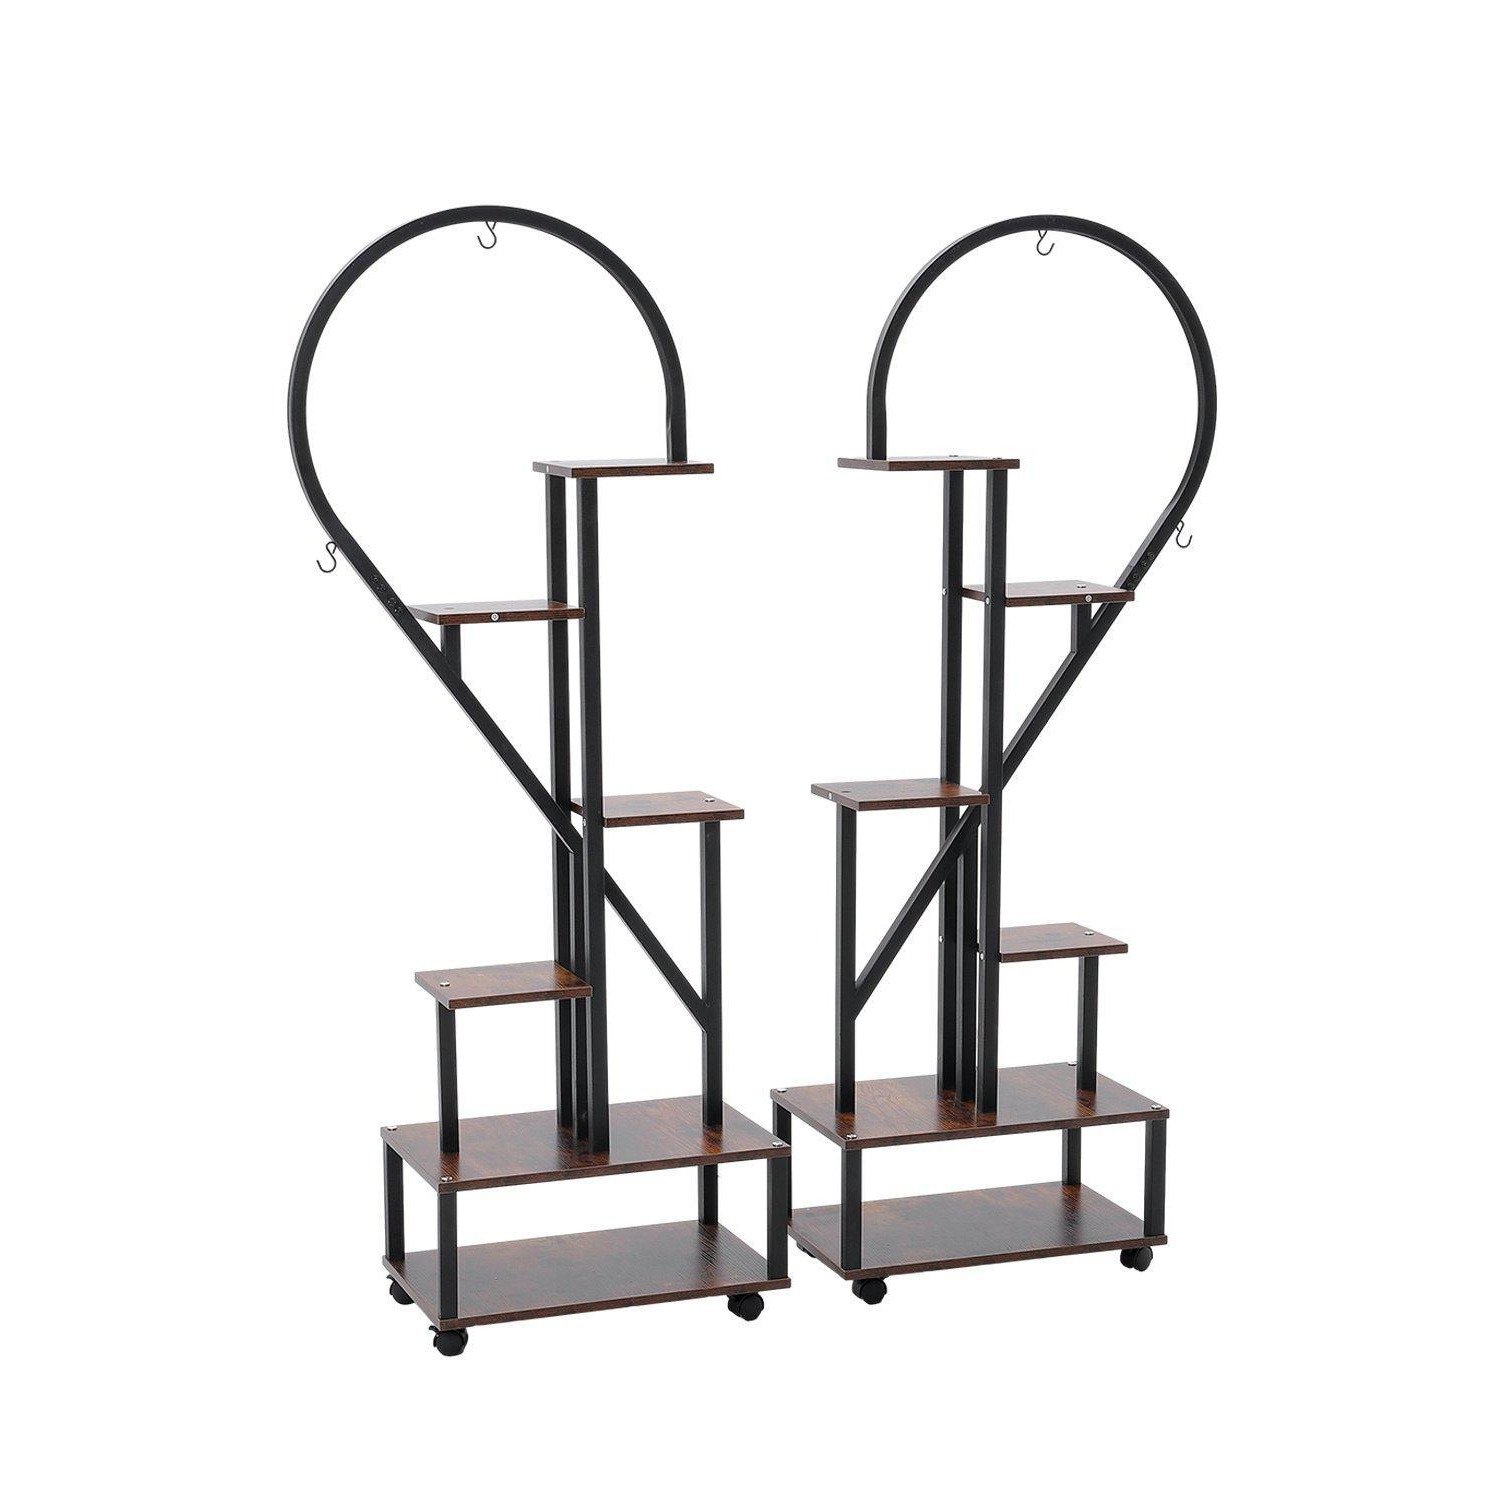 2 Pcs Half-Heart-Shaped Tiered Plant Stand - image 1